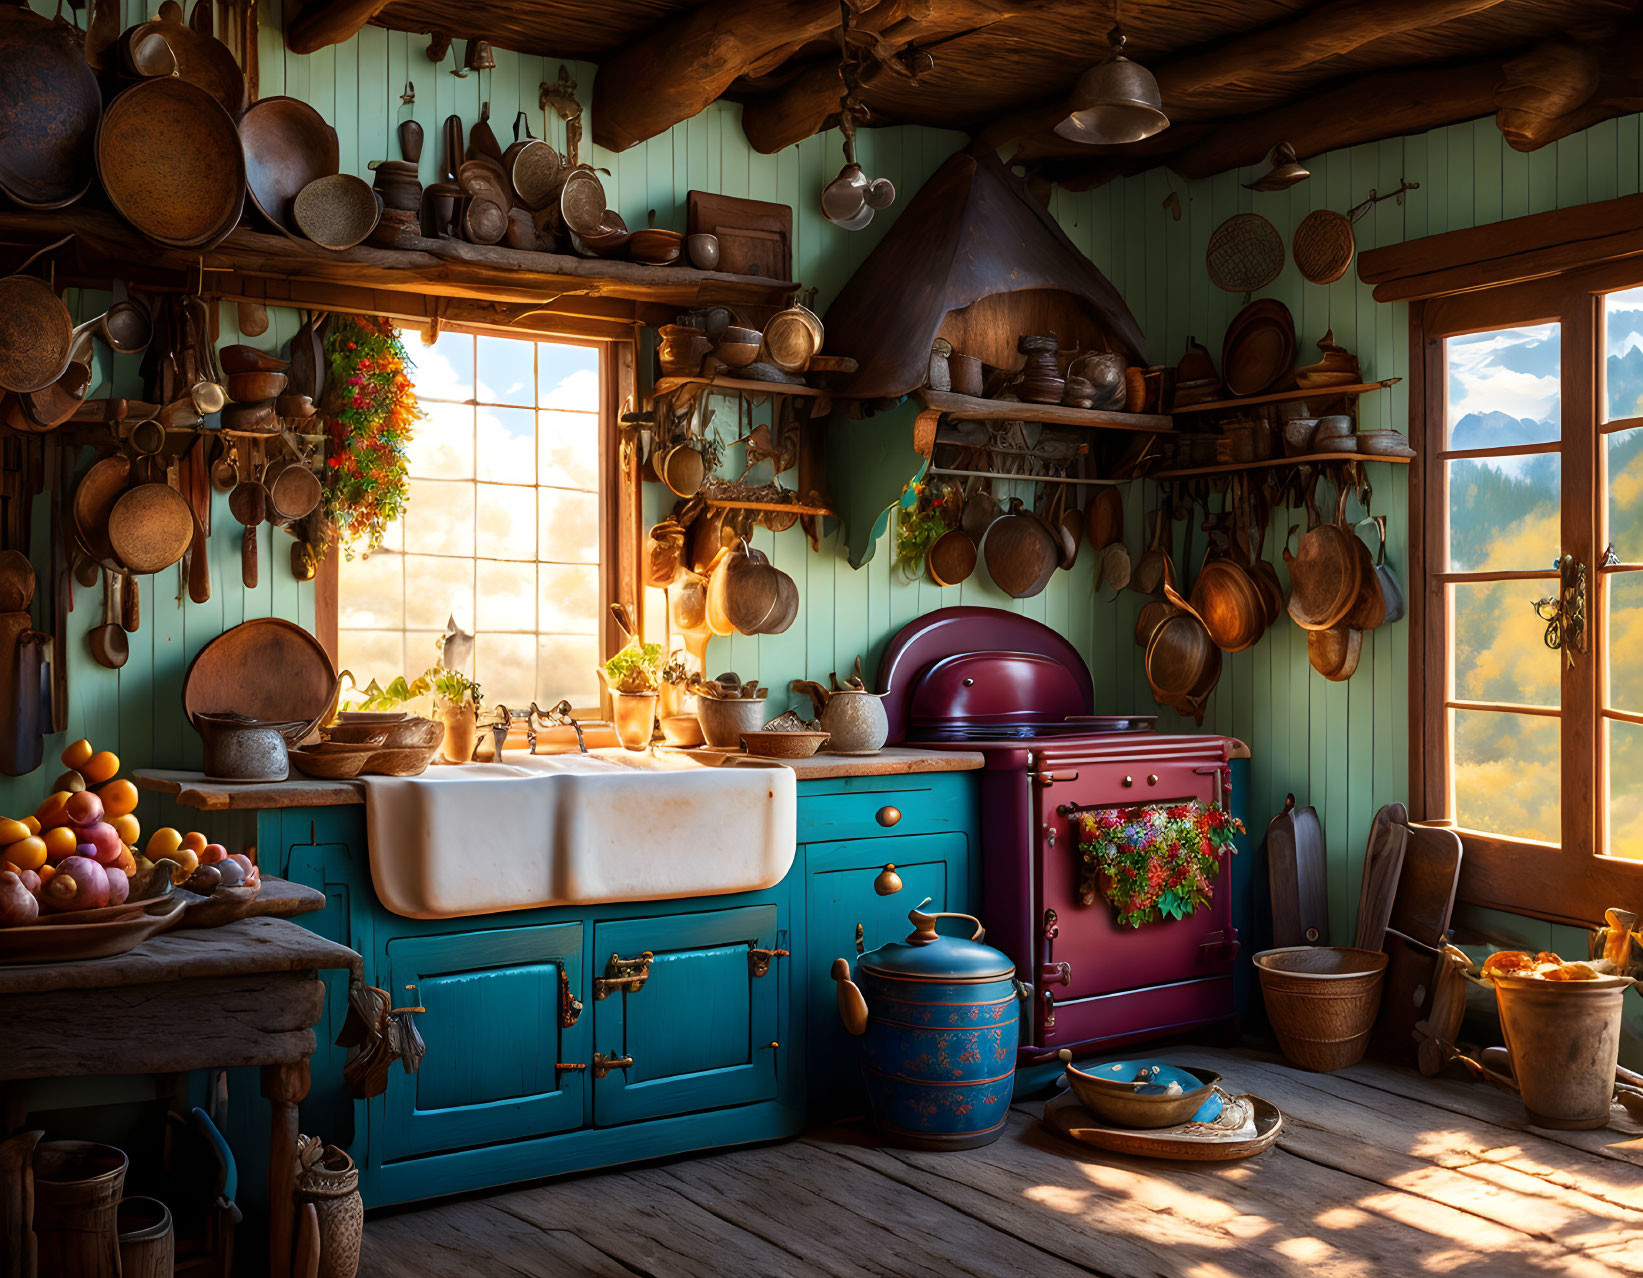 Vintage Rustic Kitchen with Hanging Pots and Wooden Utensils